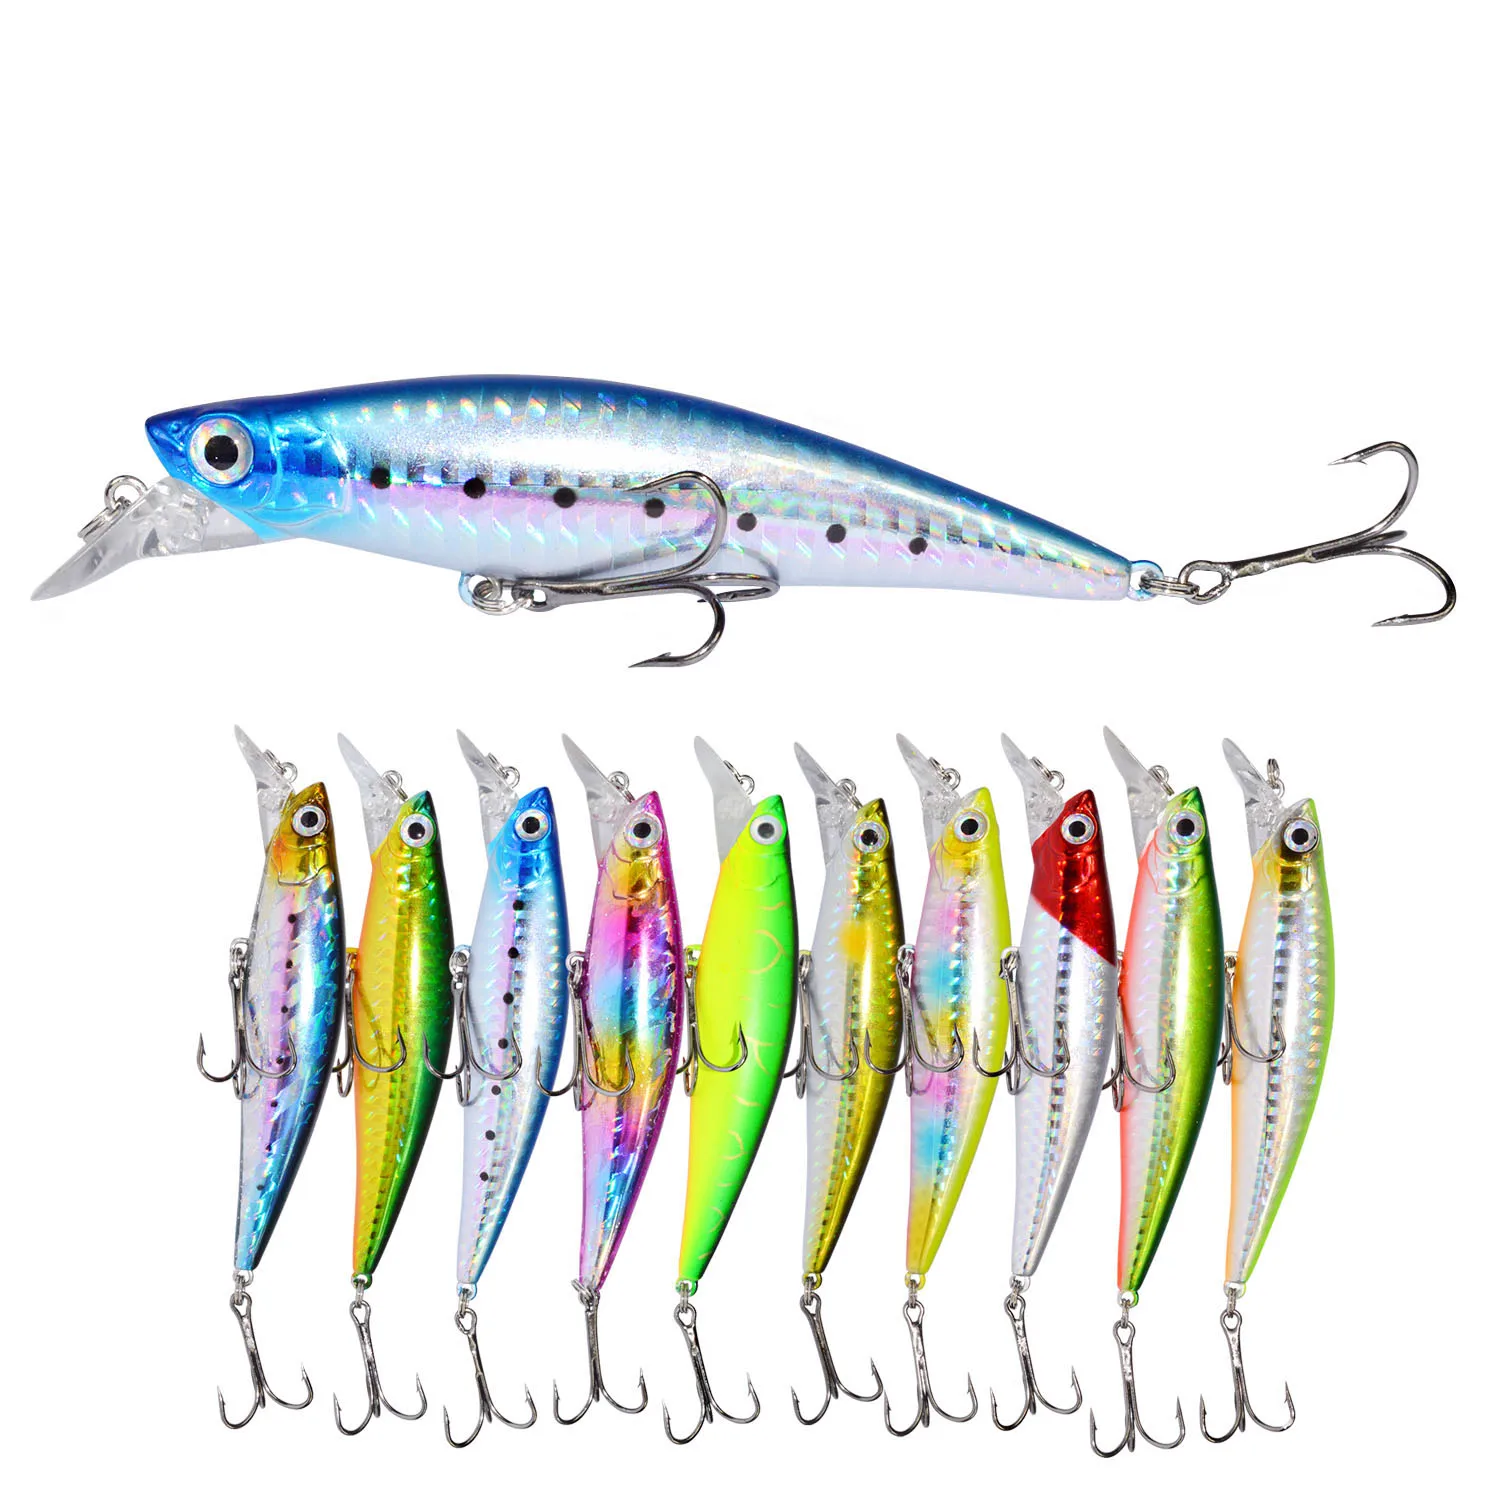 

Minnow Fishing Lure 32g/104mm sinking Artificial Hard Bait Bass Wobblers Lures Crankbait Pike Treble Hooks tackle, 8 colors